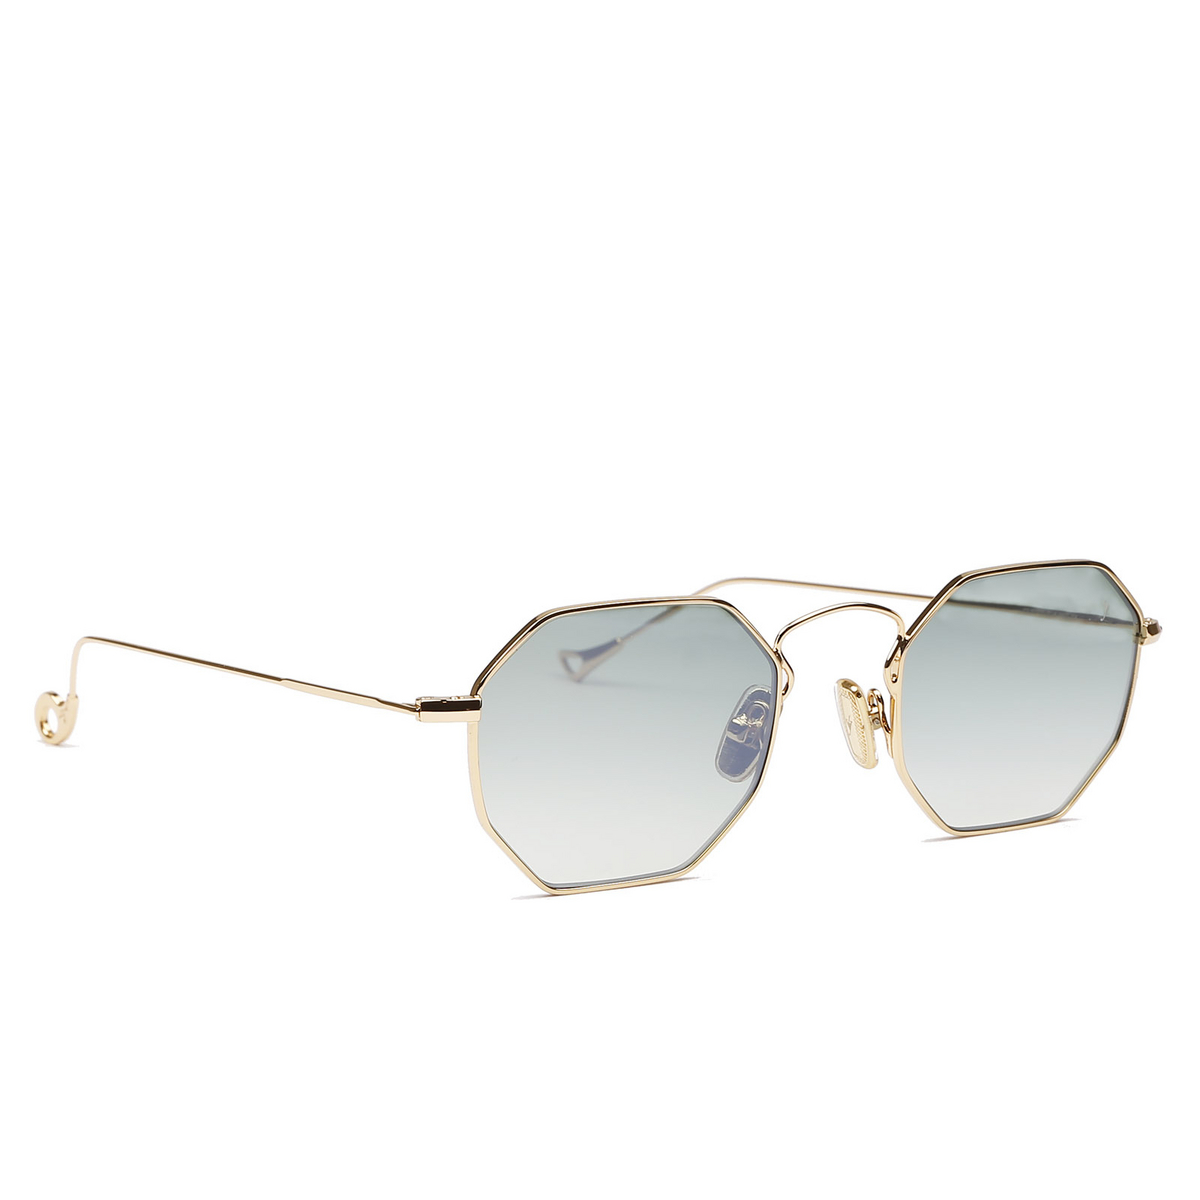 Eyepetizer CLAIRE Sunglasses C.4-11F Gold - three-quarters view